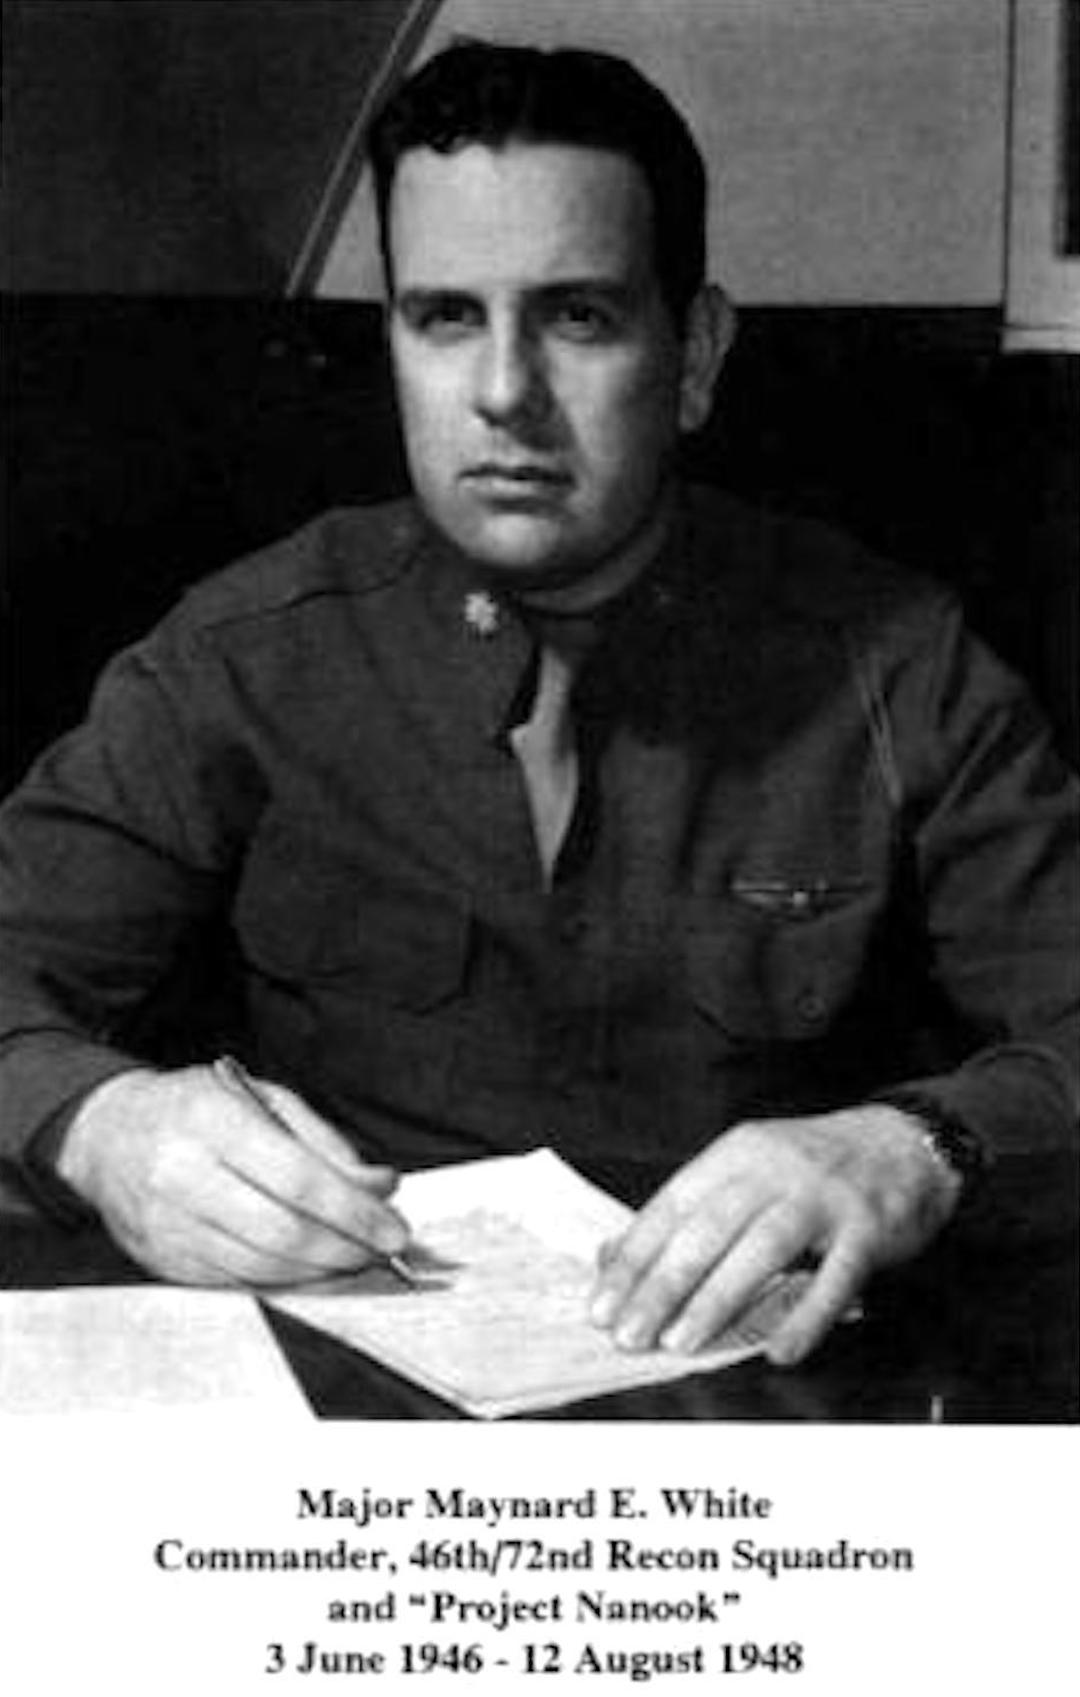 Major Maynard E White, Commander of the 46th/72nd Recon Squadron, led the official US Arctic survey 'Project Nanook' in 1946-48, which found firm evidence of a cyclical pole shift and led to the CIA cover-up and disinformation campaign of the subject from 1948 until the present day.